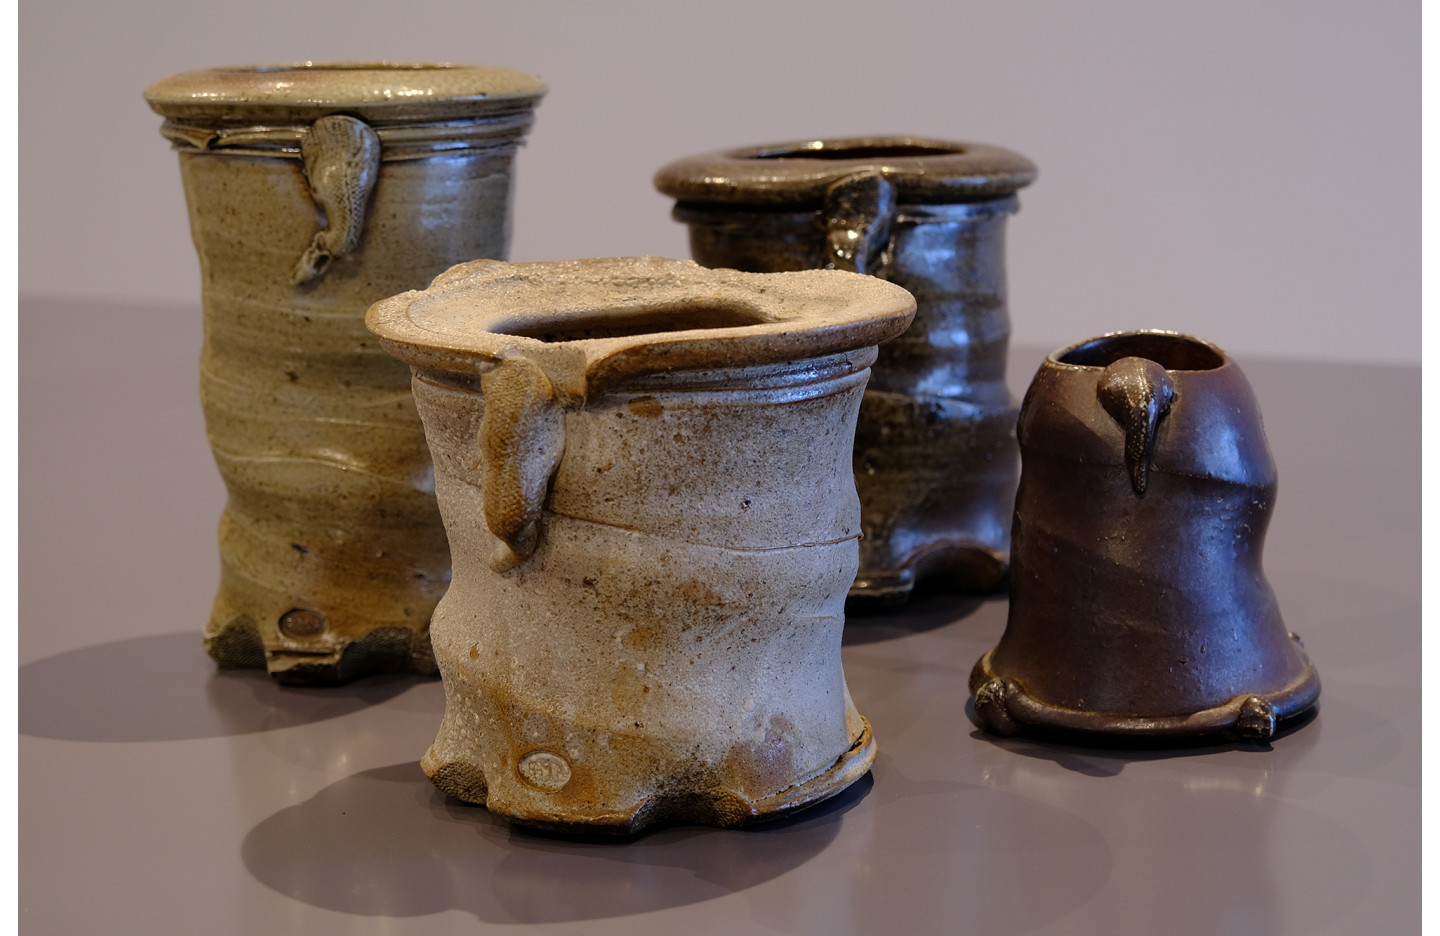 What Do Ceramics Want?, Ramp Gallery (2021)